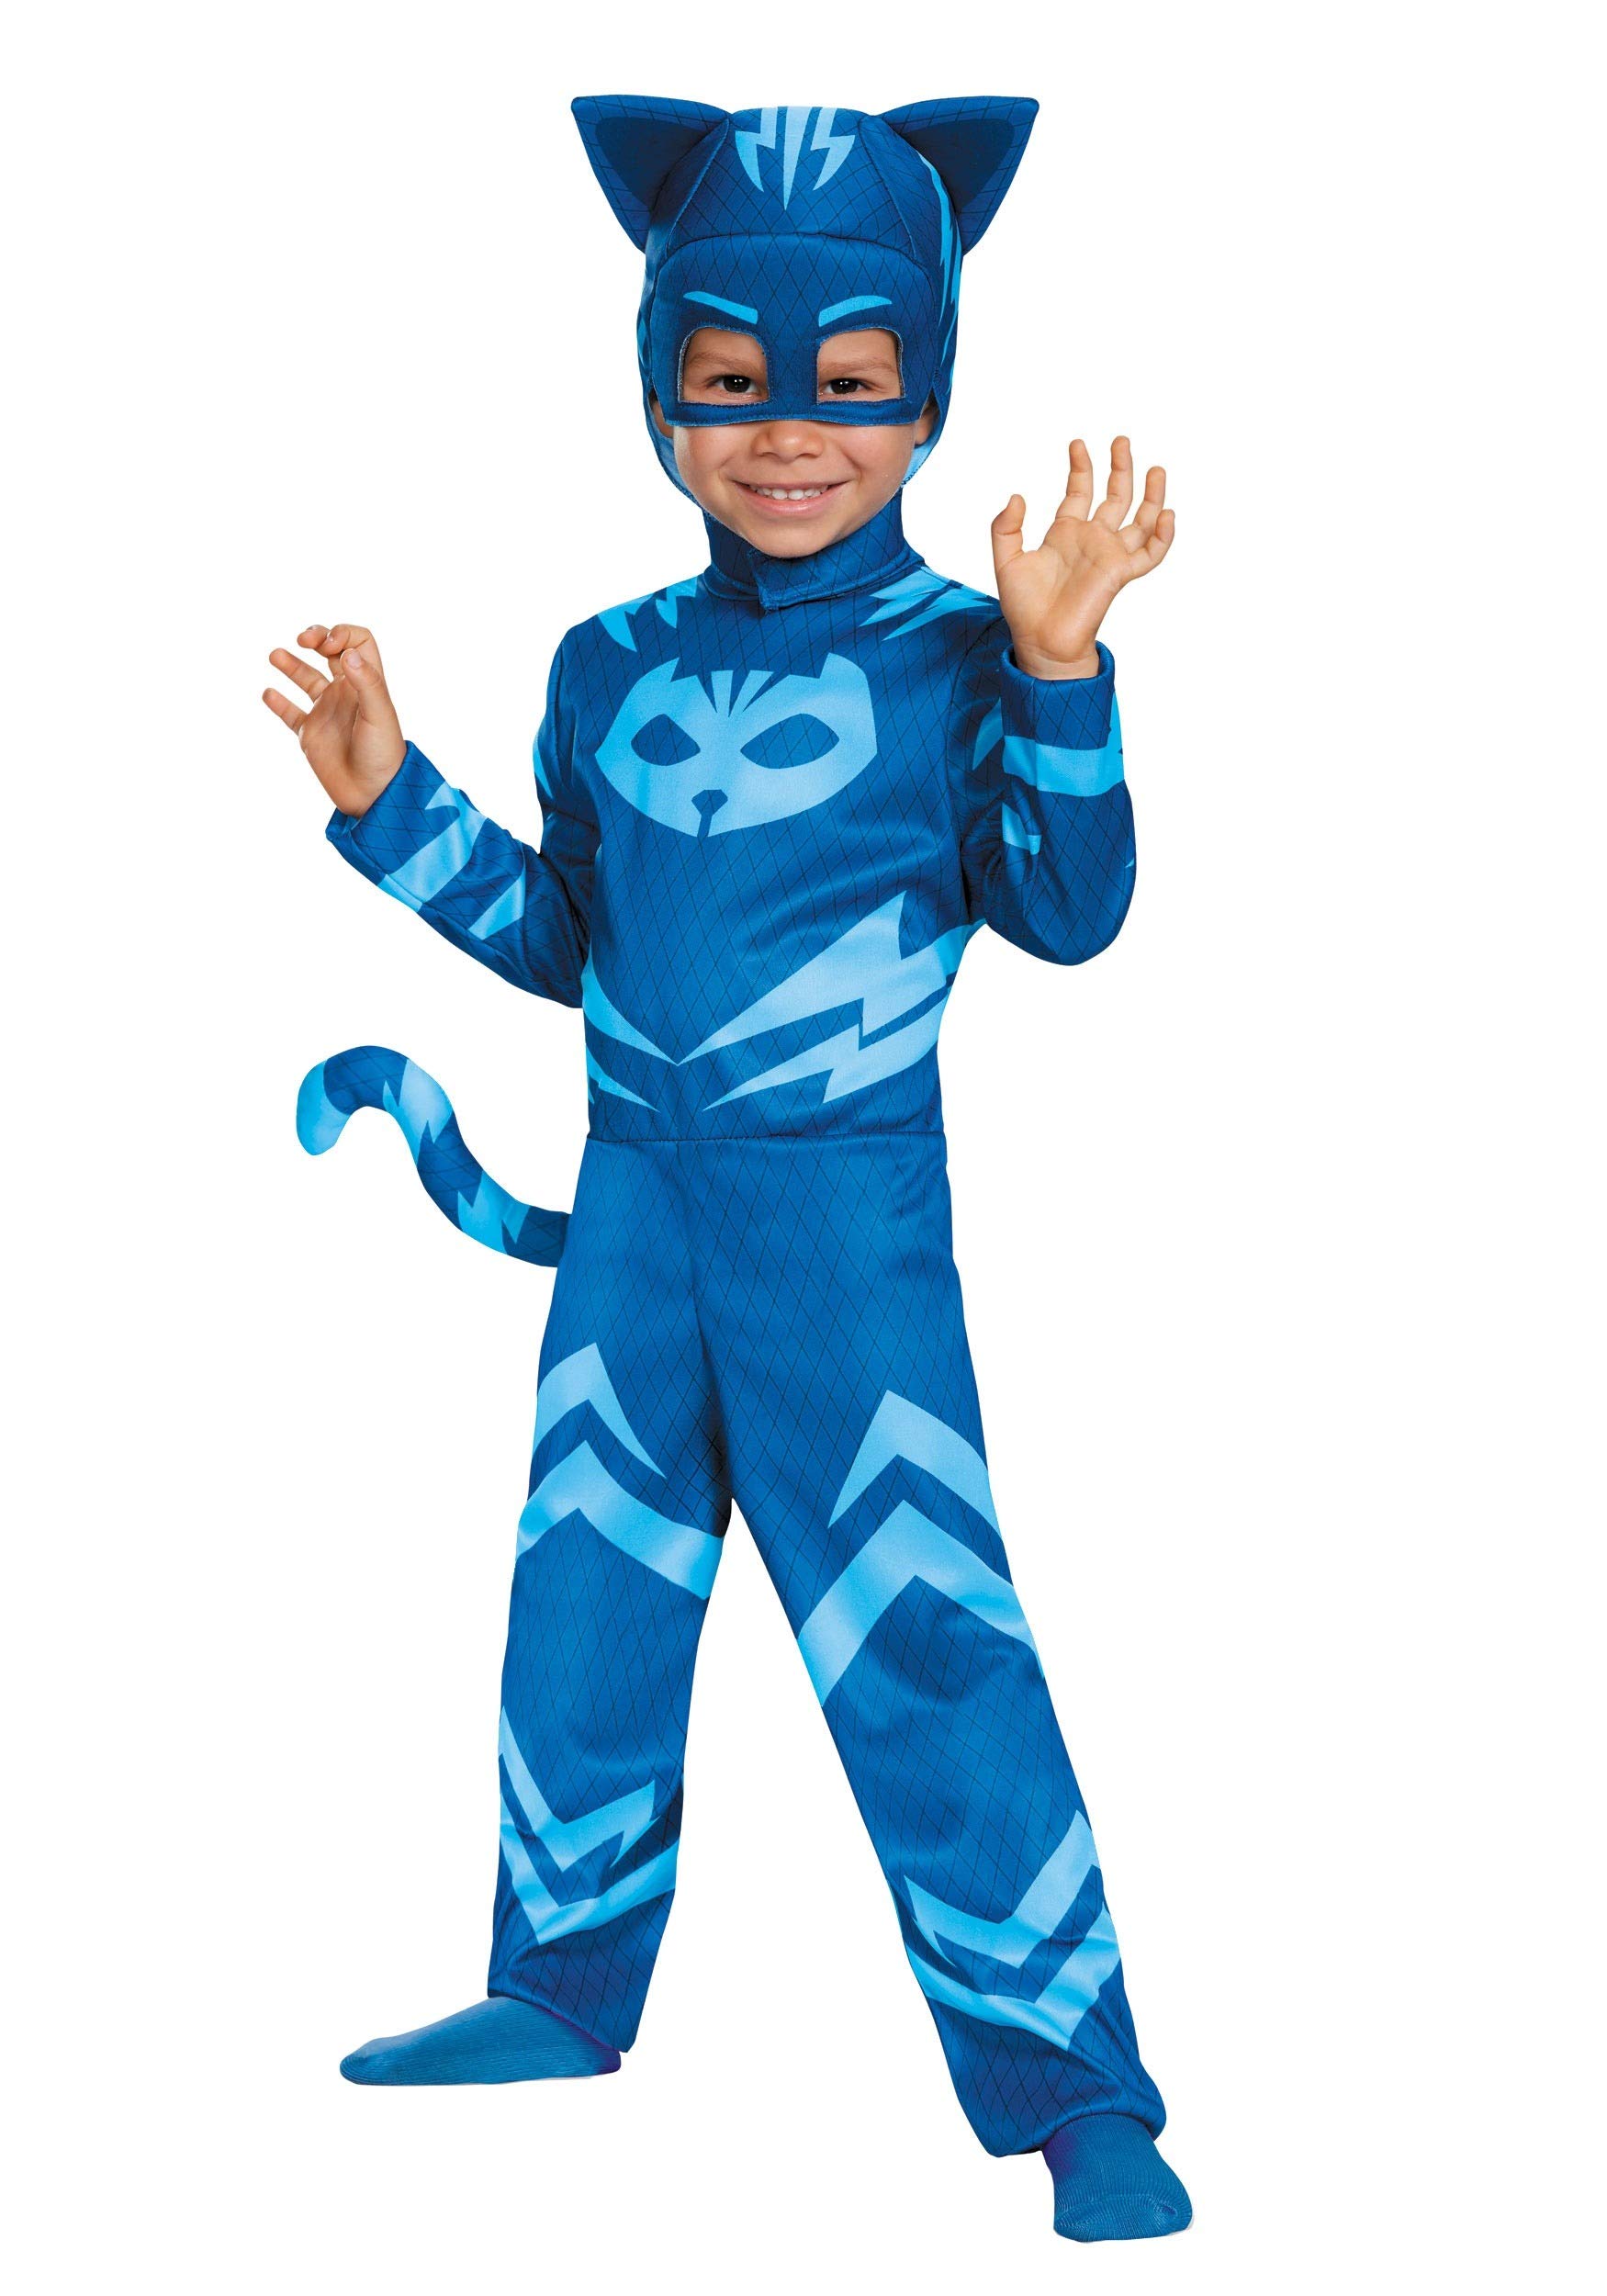 Disguise Catboy Costume for Kids, Official PJ Masks Costume Jumpsuit